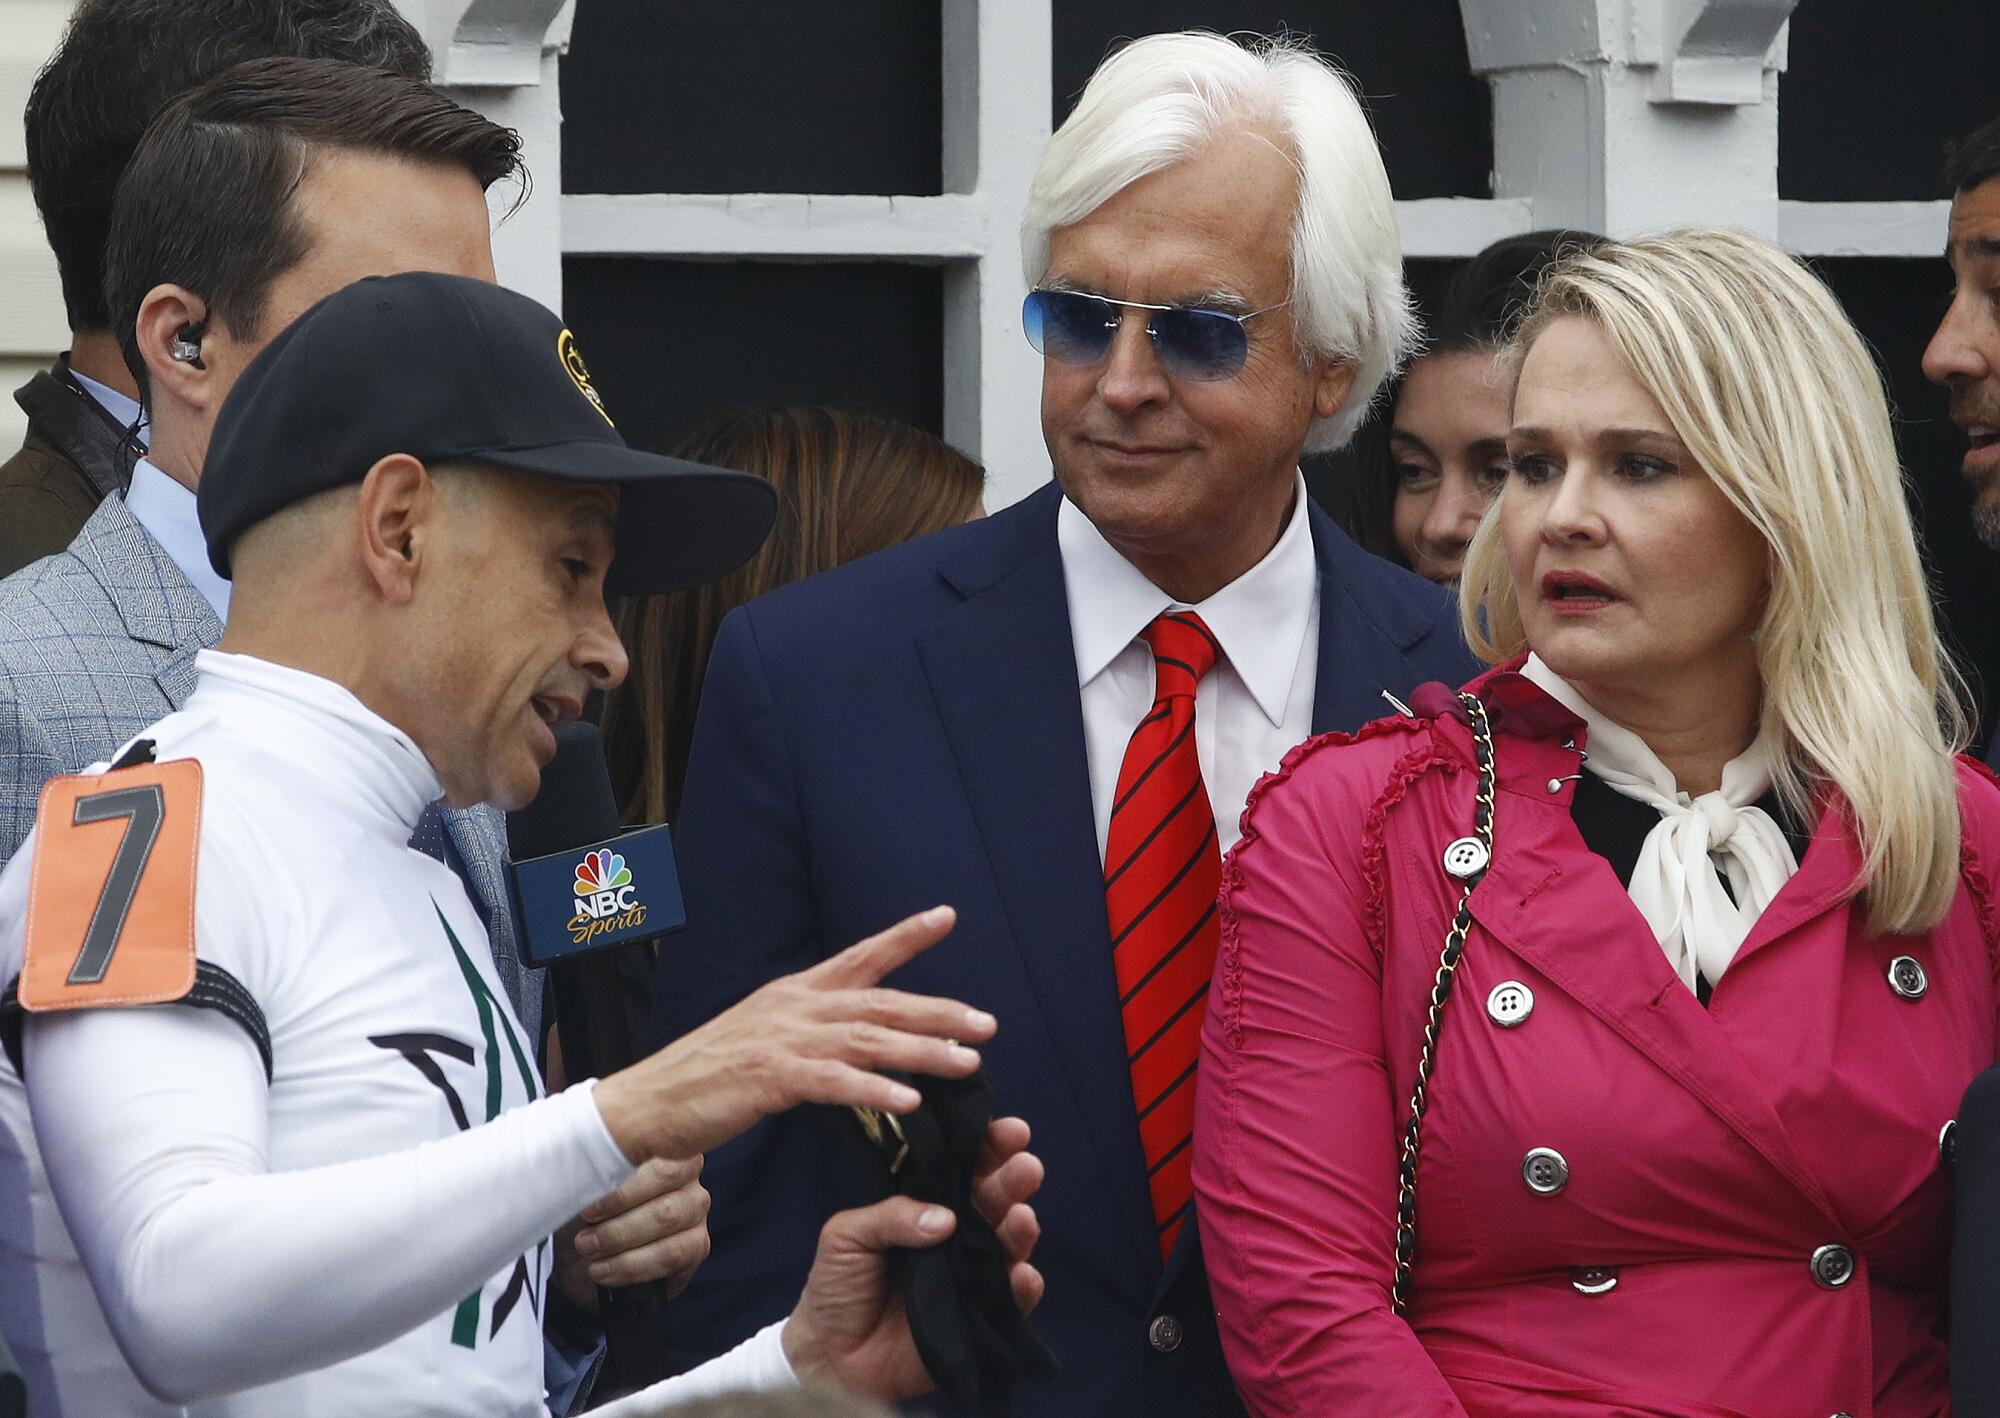 Jockey Mike Smith speaks to Bob and Jill Baffert after guiding Justify to victory in the 143rd Preakness Stakes in 2018.